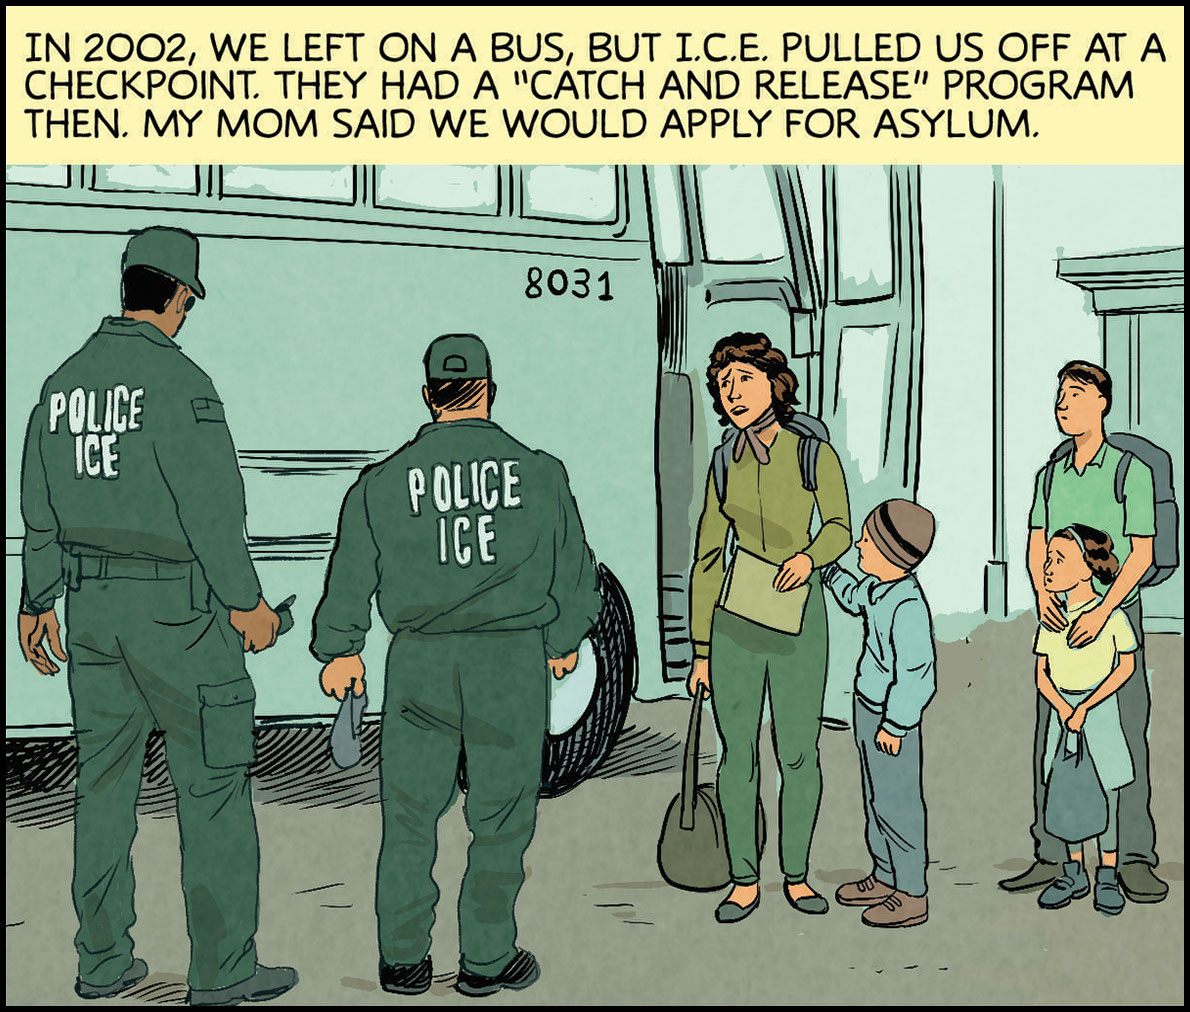 In 2002, we left on a bus, but ICE pulled us off at a checkpoint. They had a “catch and release” program then. My mom said we would apply for asylum. Quote from Mom: “We will be OK!”